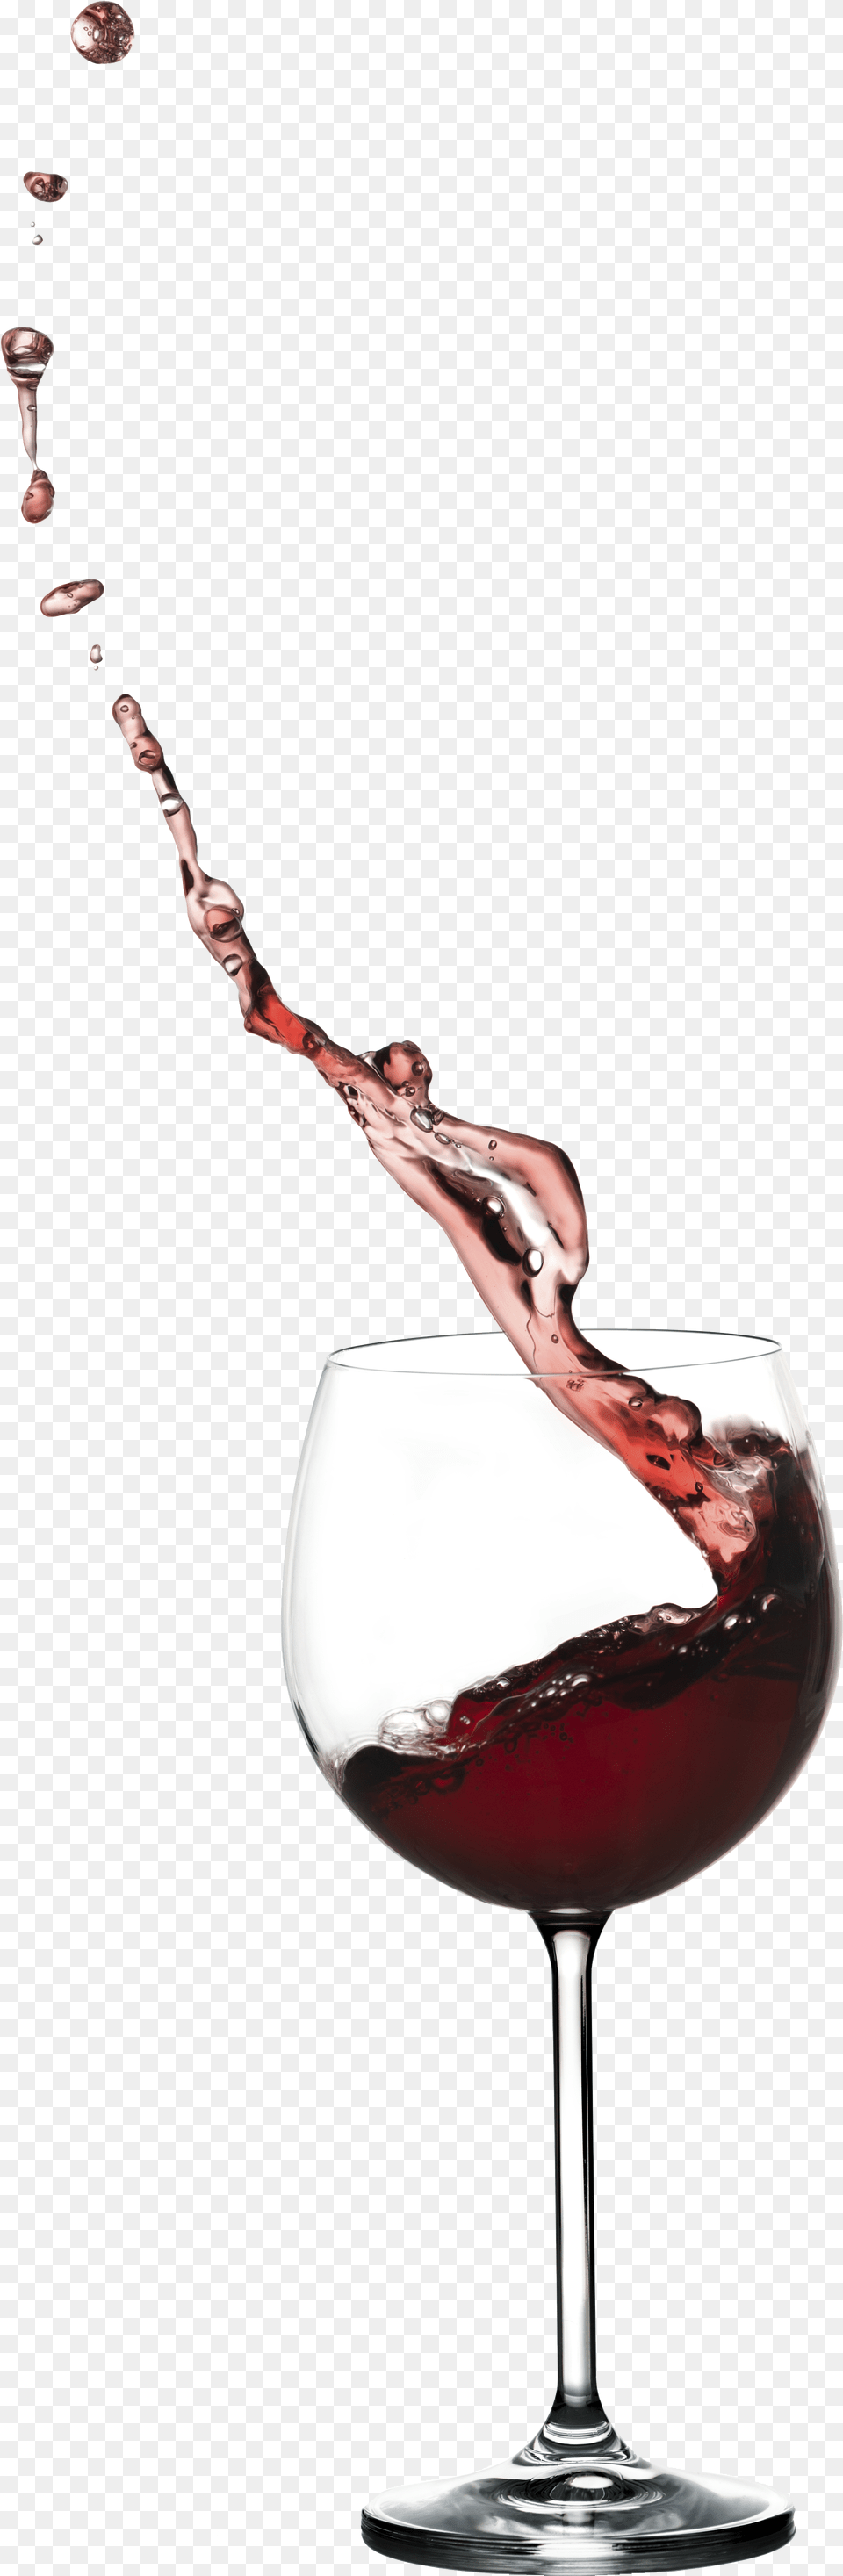 Transparent Red Wine Glass Transparent Background Wine Glass Clipart, Alcohol, Beverage, Liquor, Red Wine Png Image